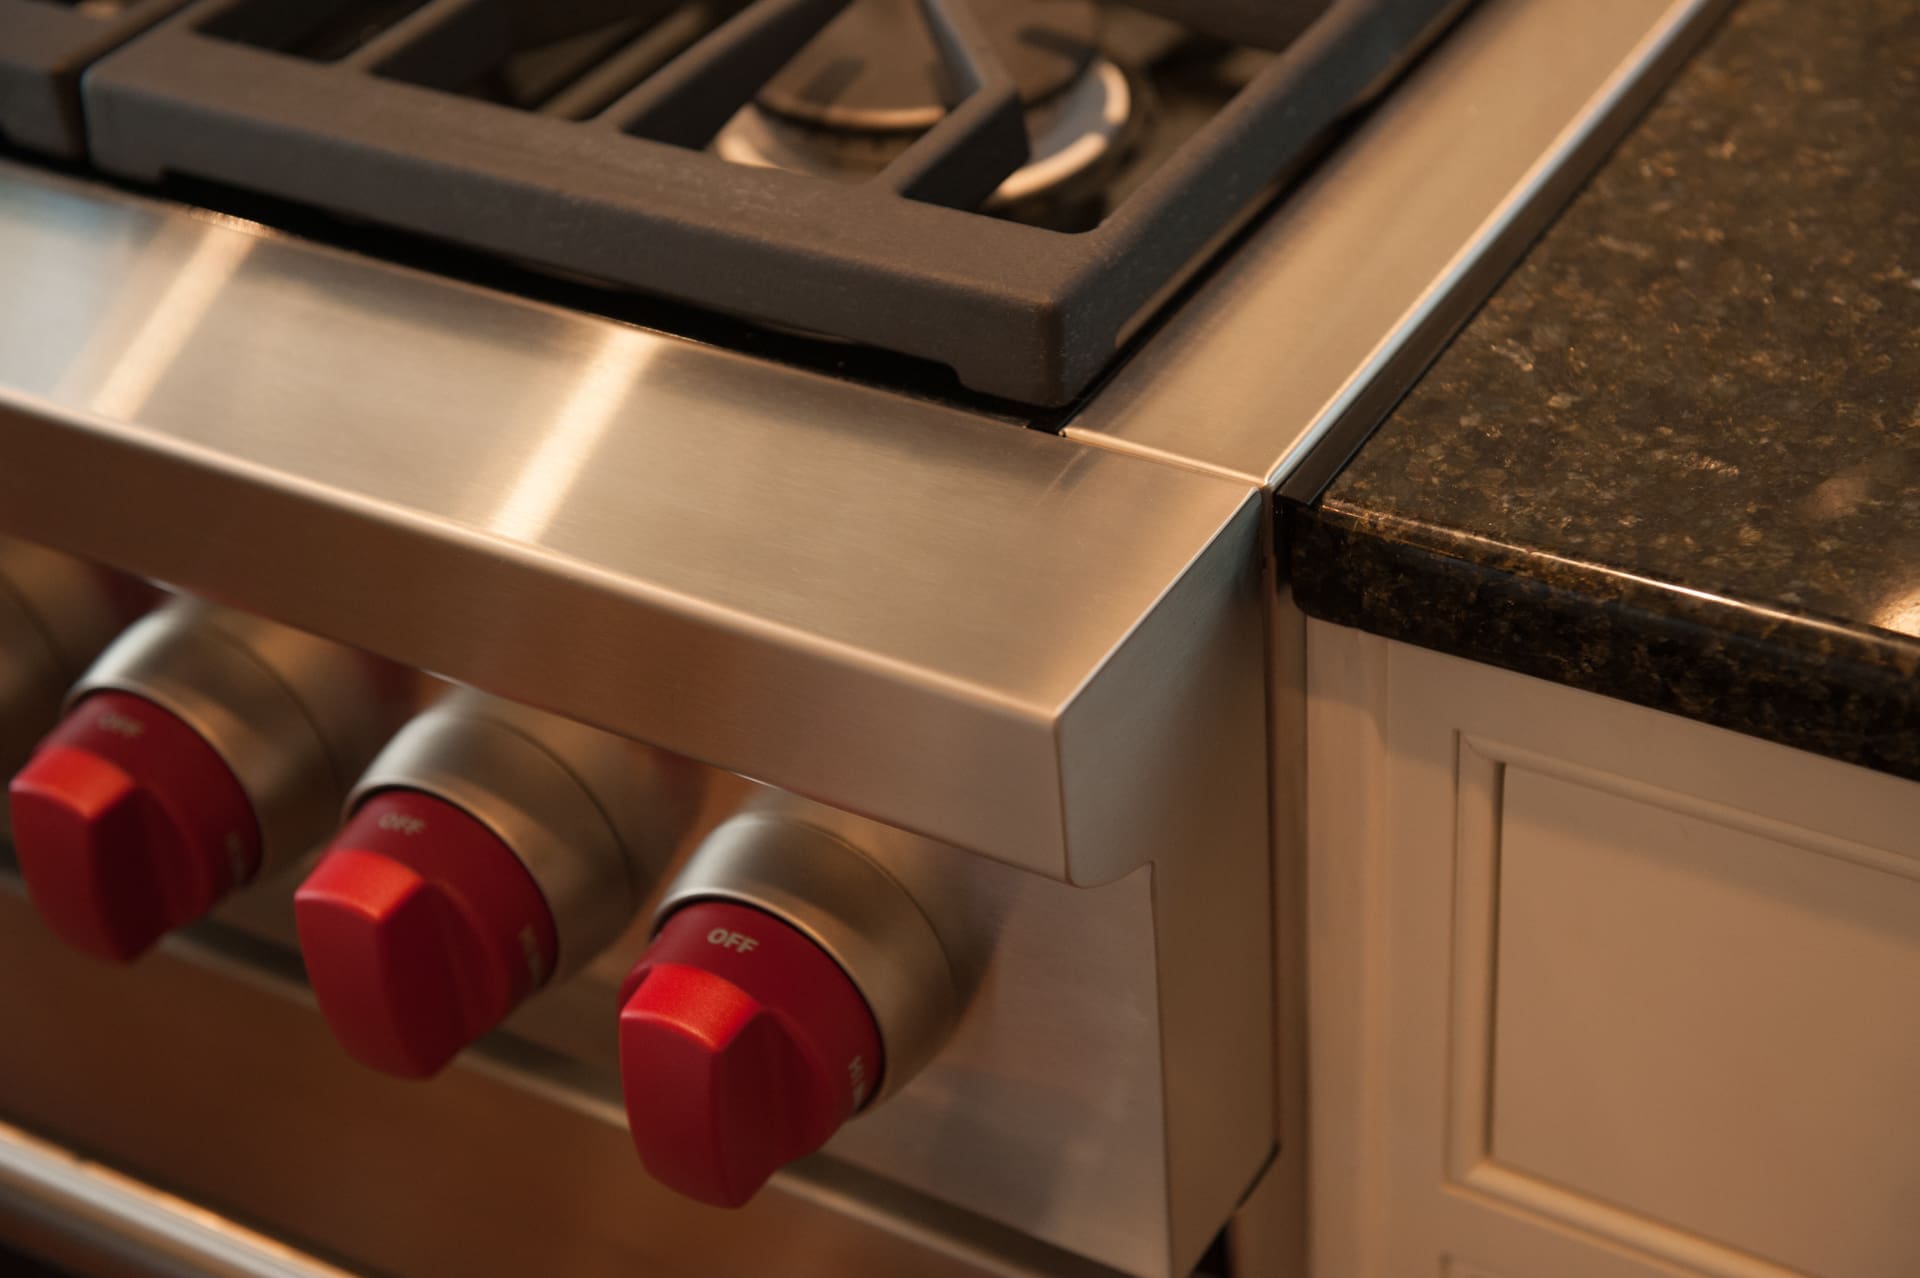 A closeup photo of a stainless steel oven and stovetop attached to a black stone countertop and white shaker-style cabinets.